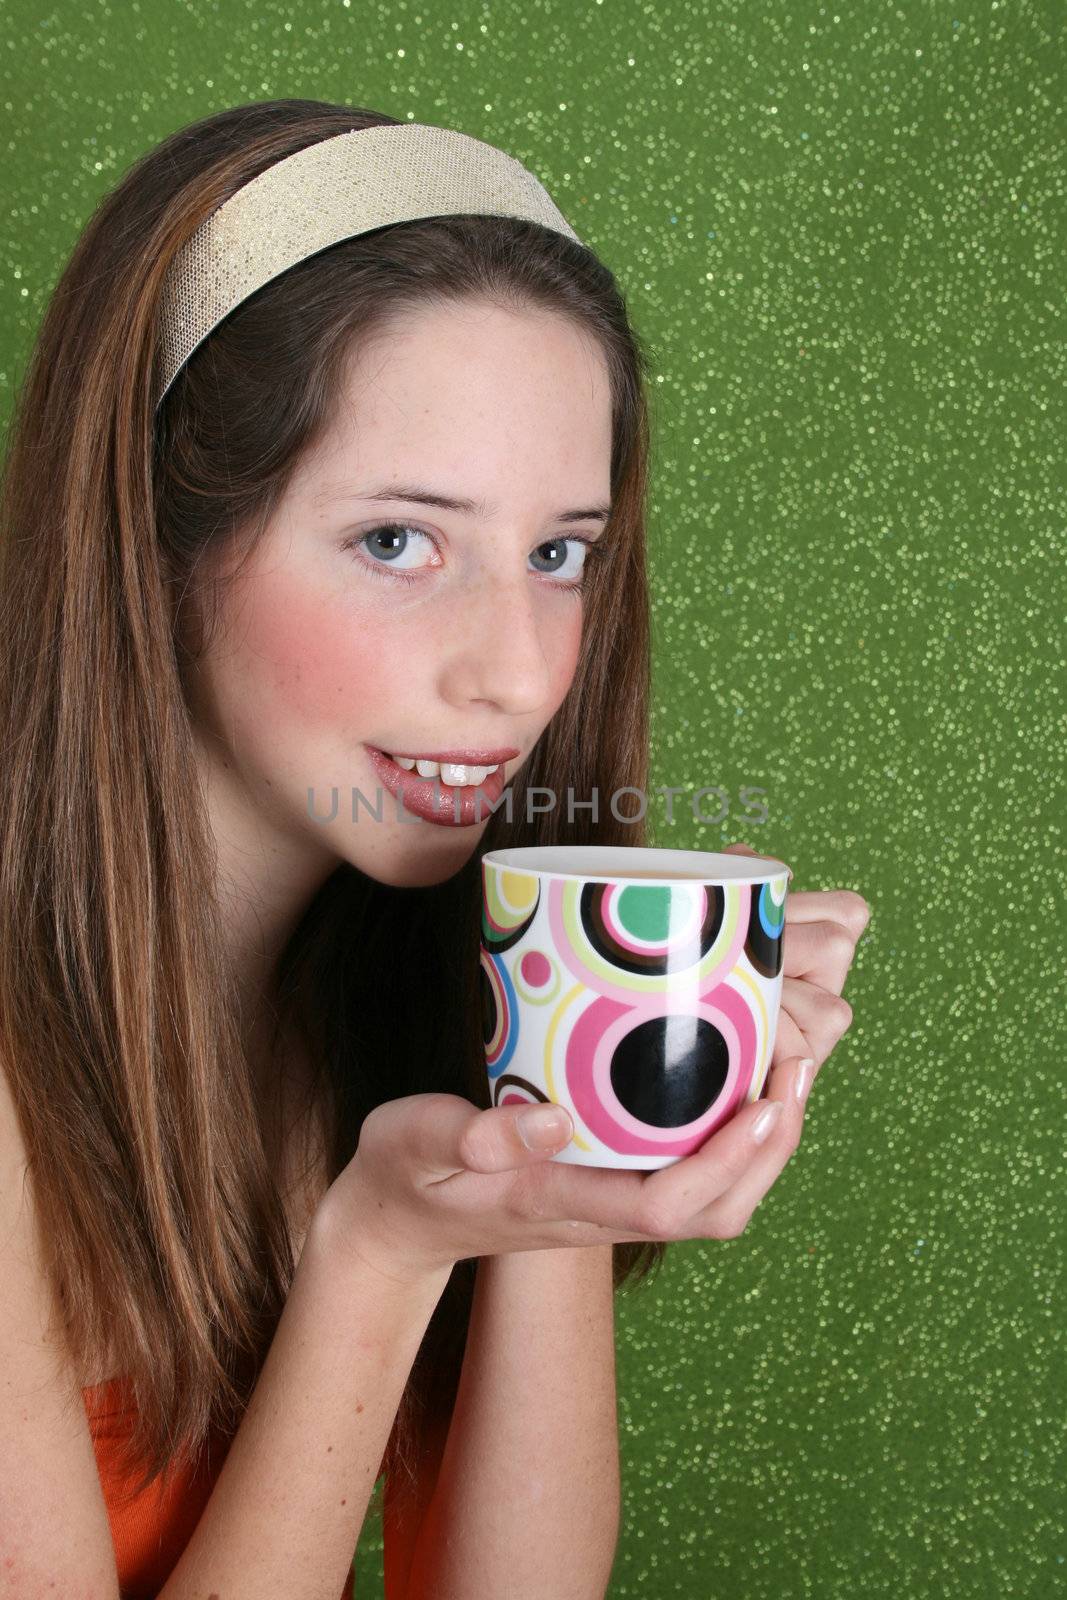 Brunette teenager on a green background wearing a broad head band